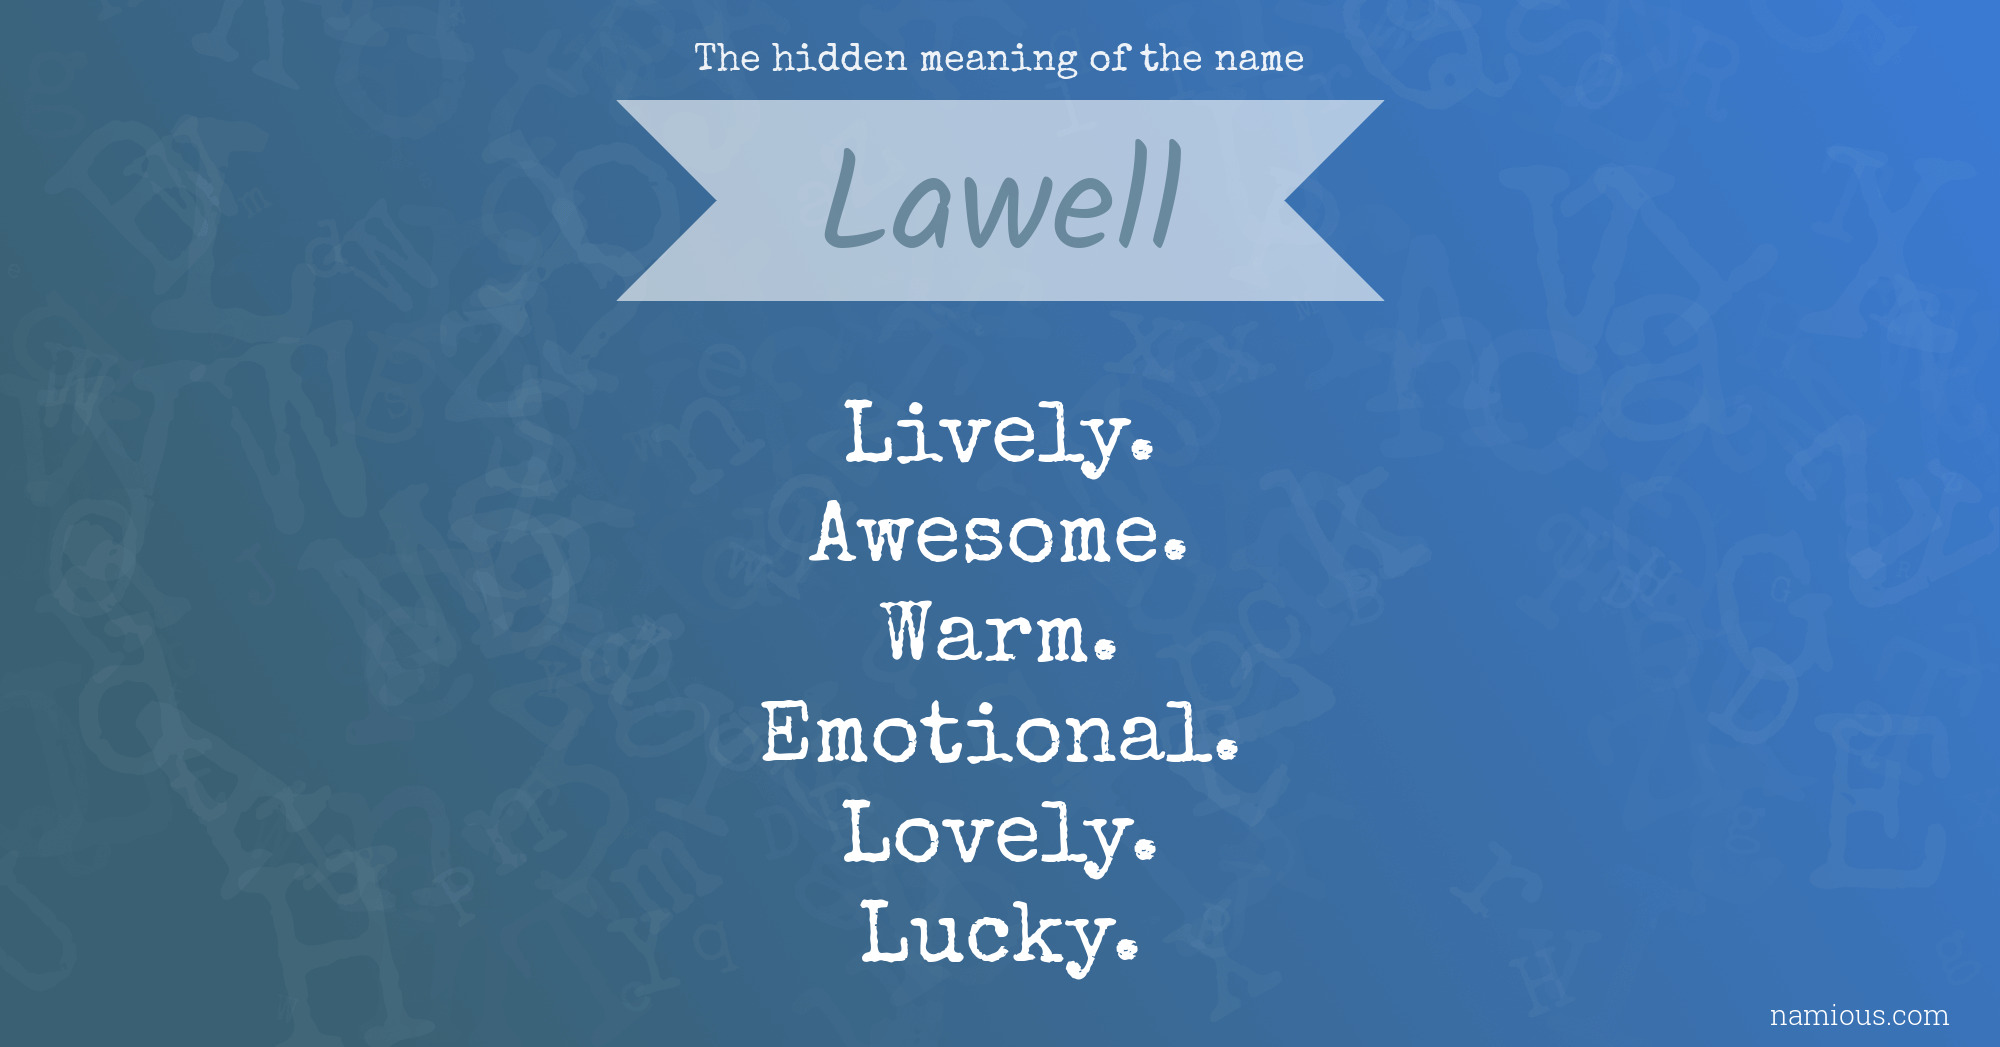 The hidden meaning of the name Lawell